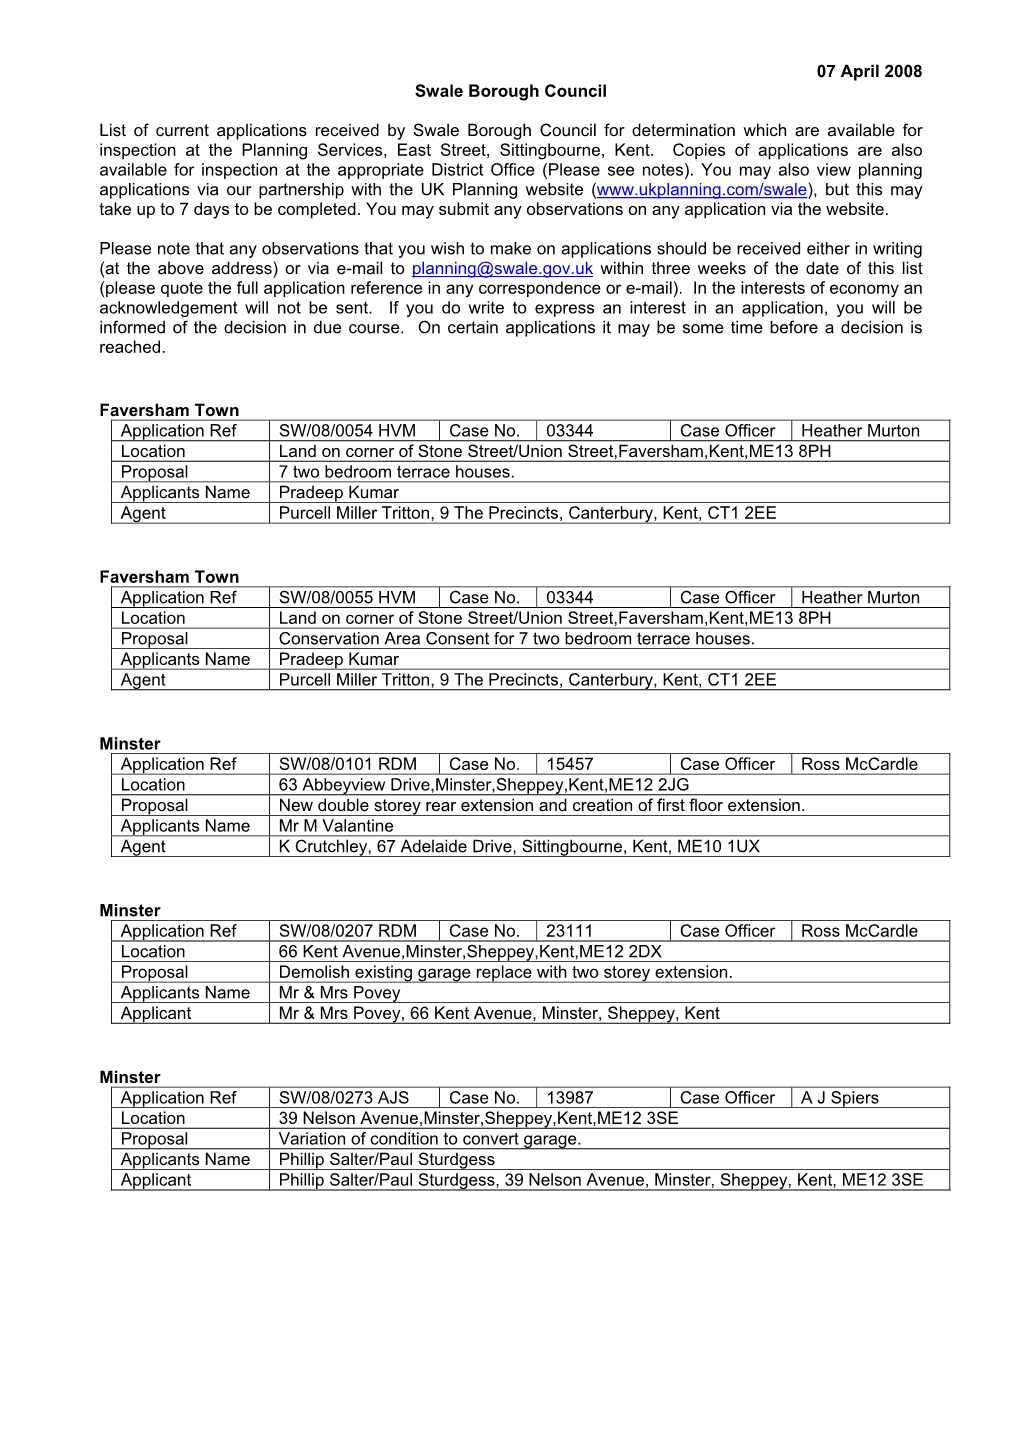 07 April 2008 Swale Borough Council List of Current Applications Received